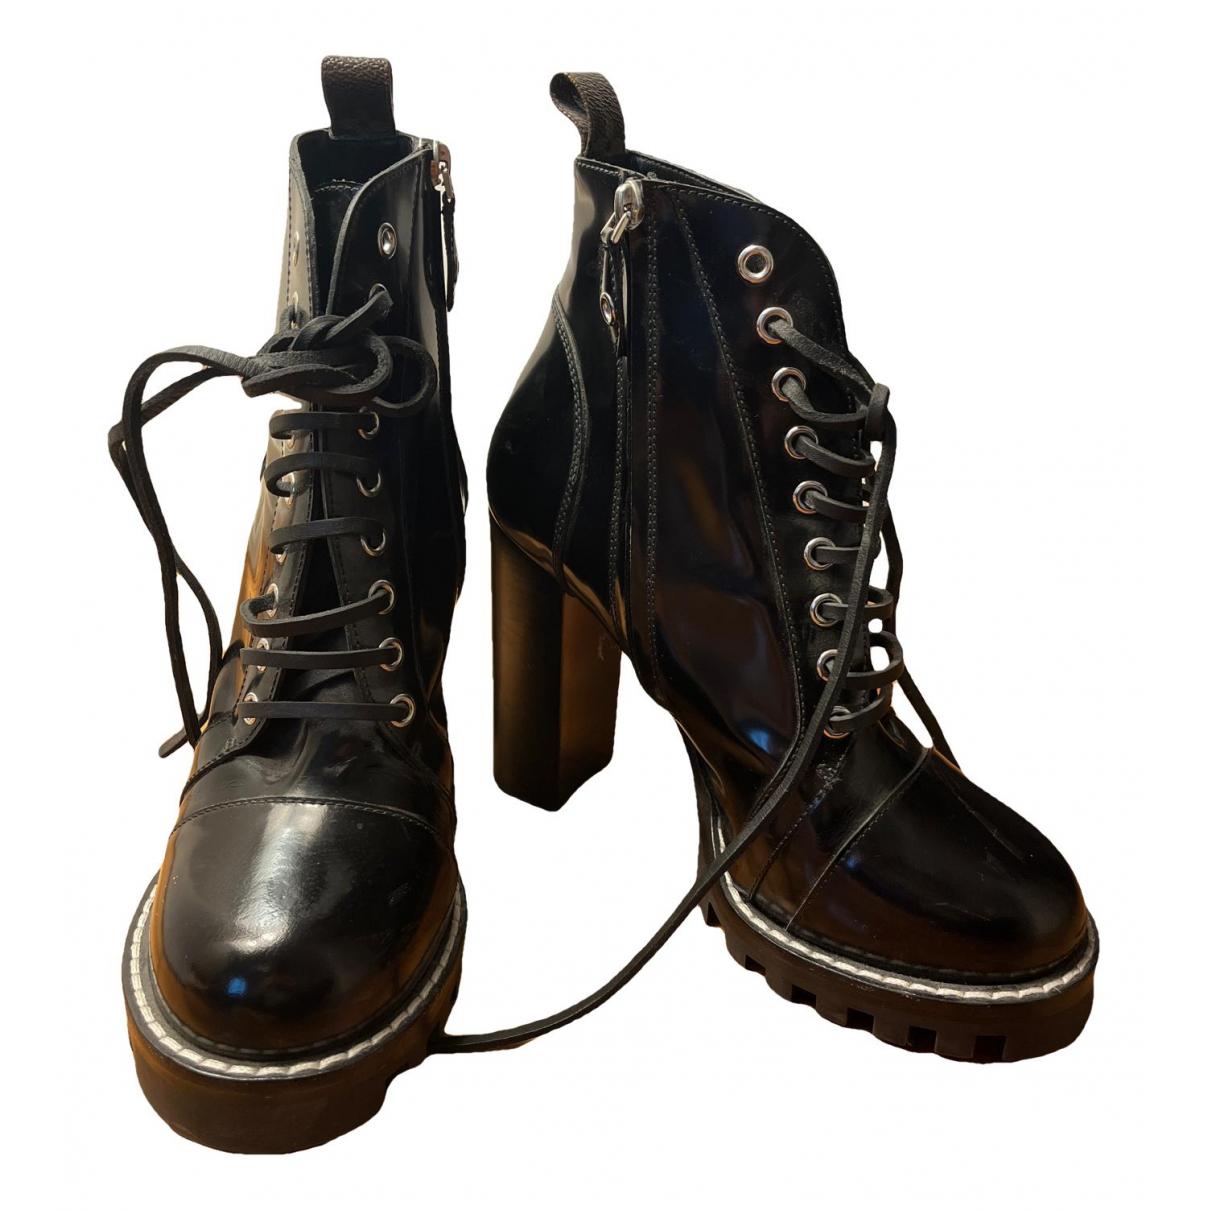 Louis Vuitton “Star Trail” ankle boots